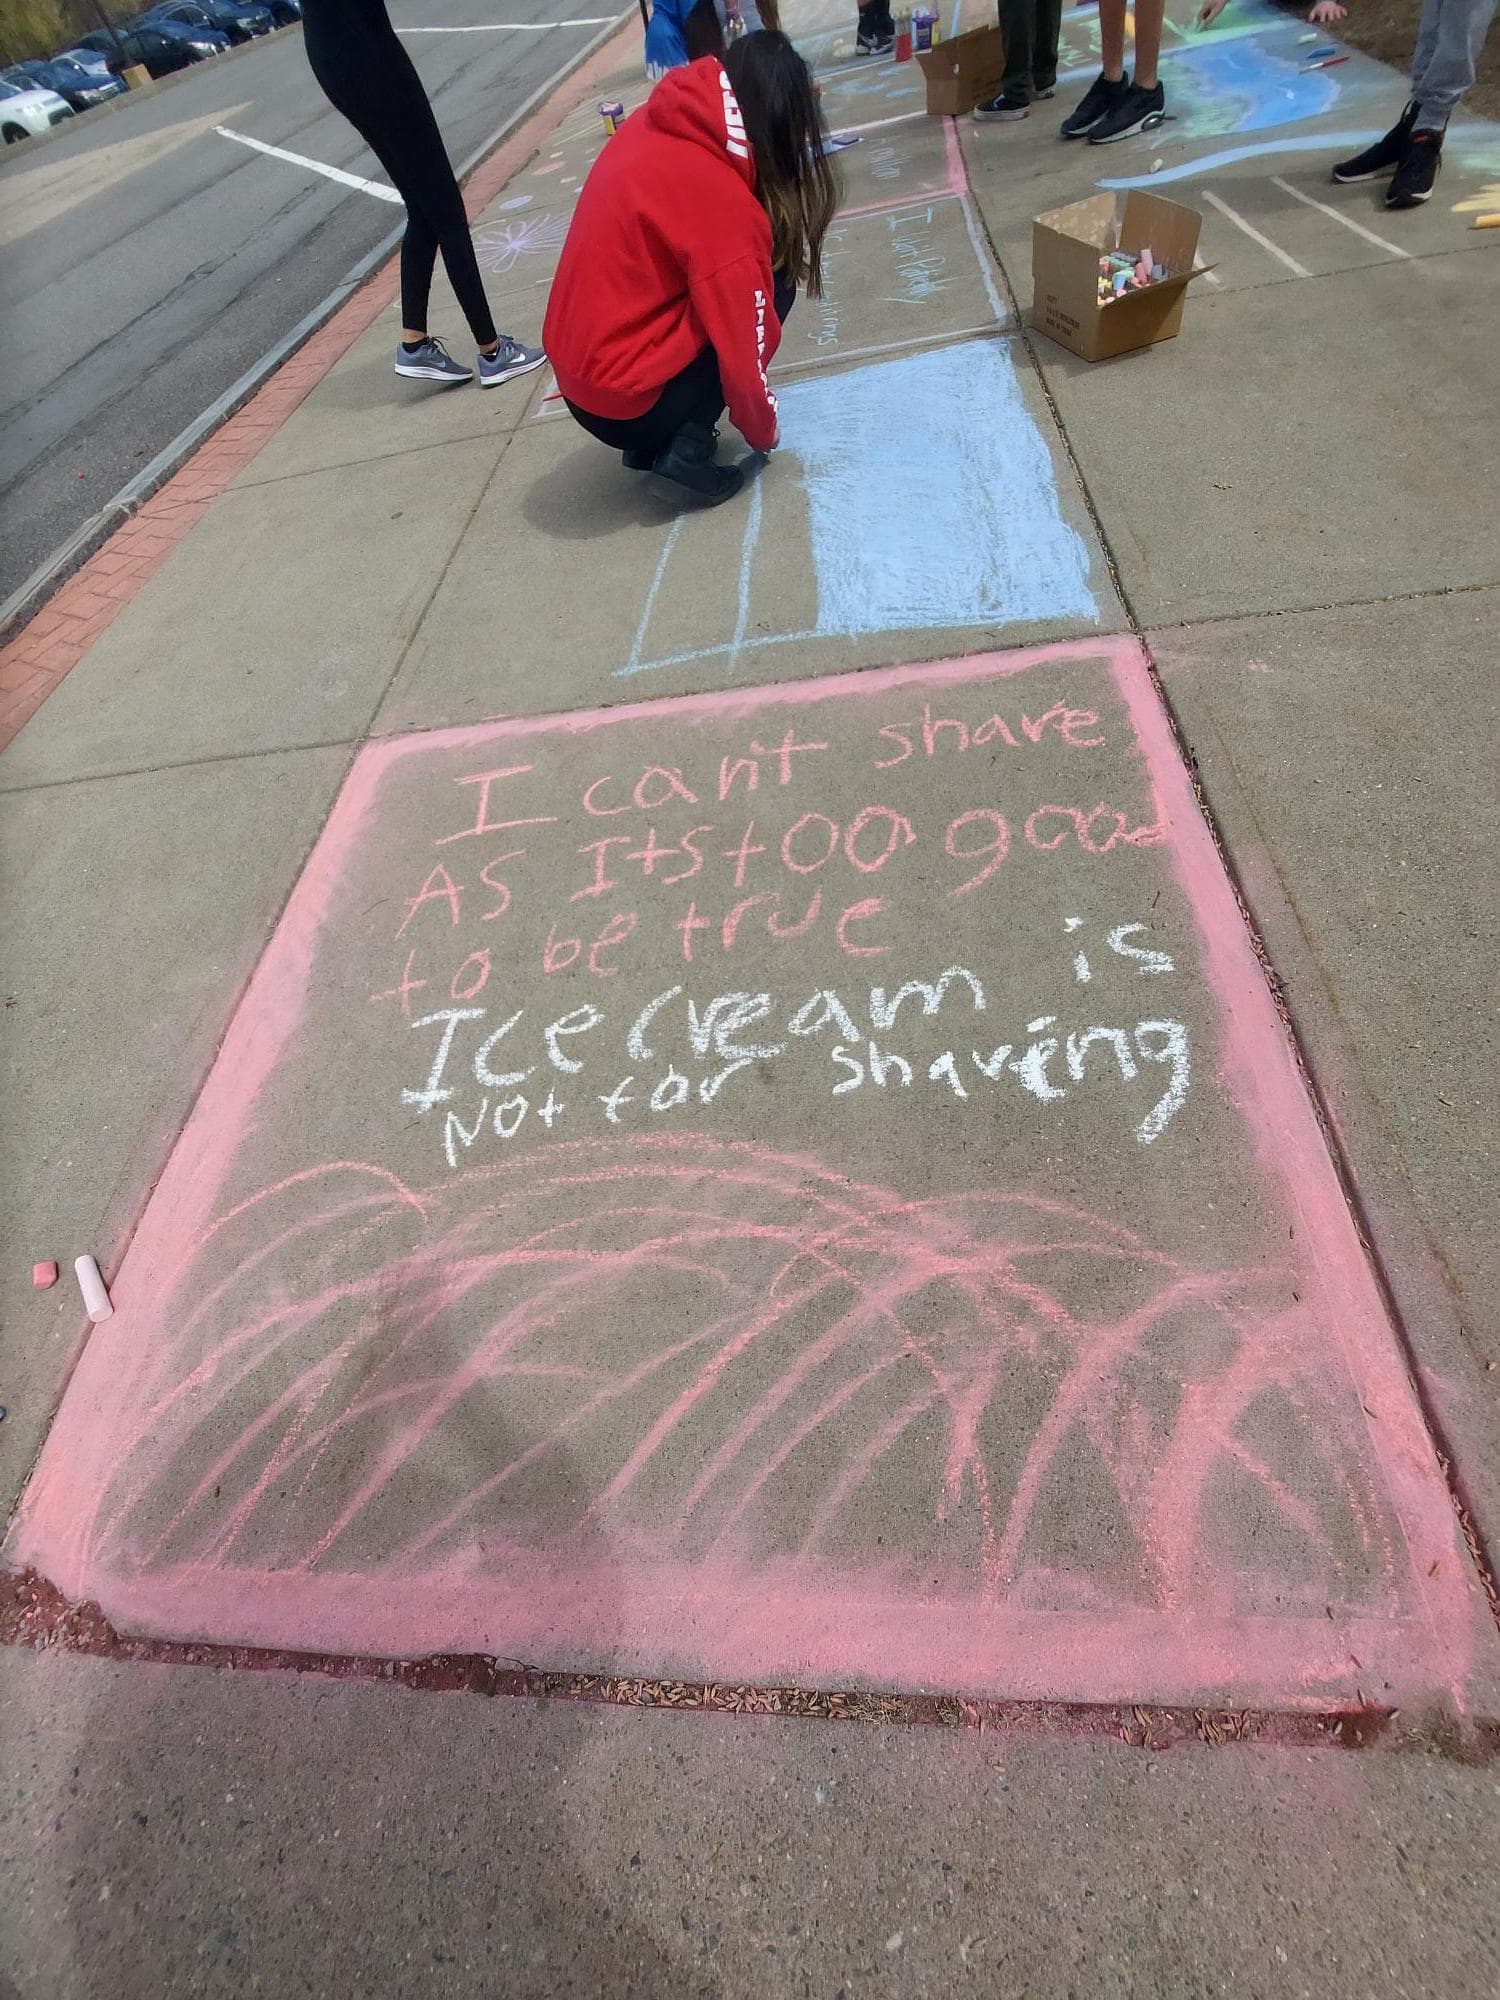 Whitcomb students study poetry with chalk haiku illustrations